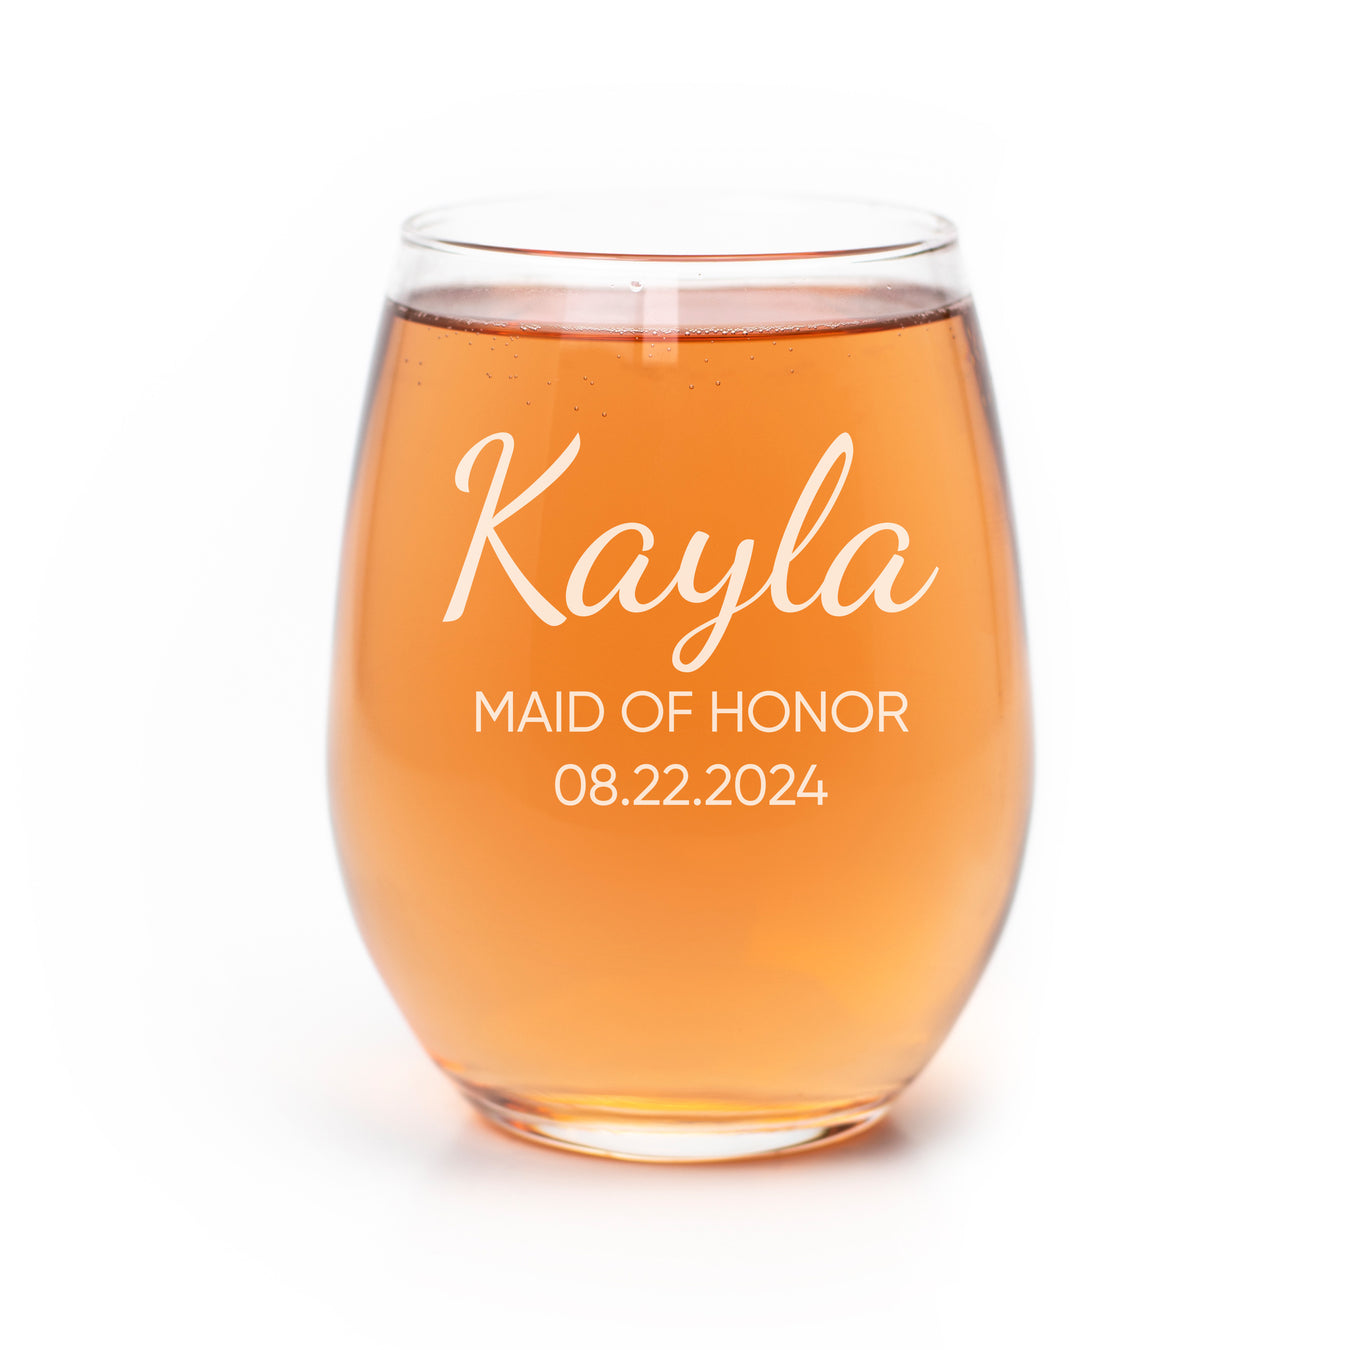 Maid of Honor Gifts